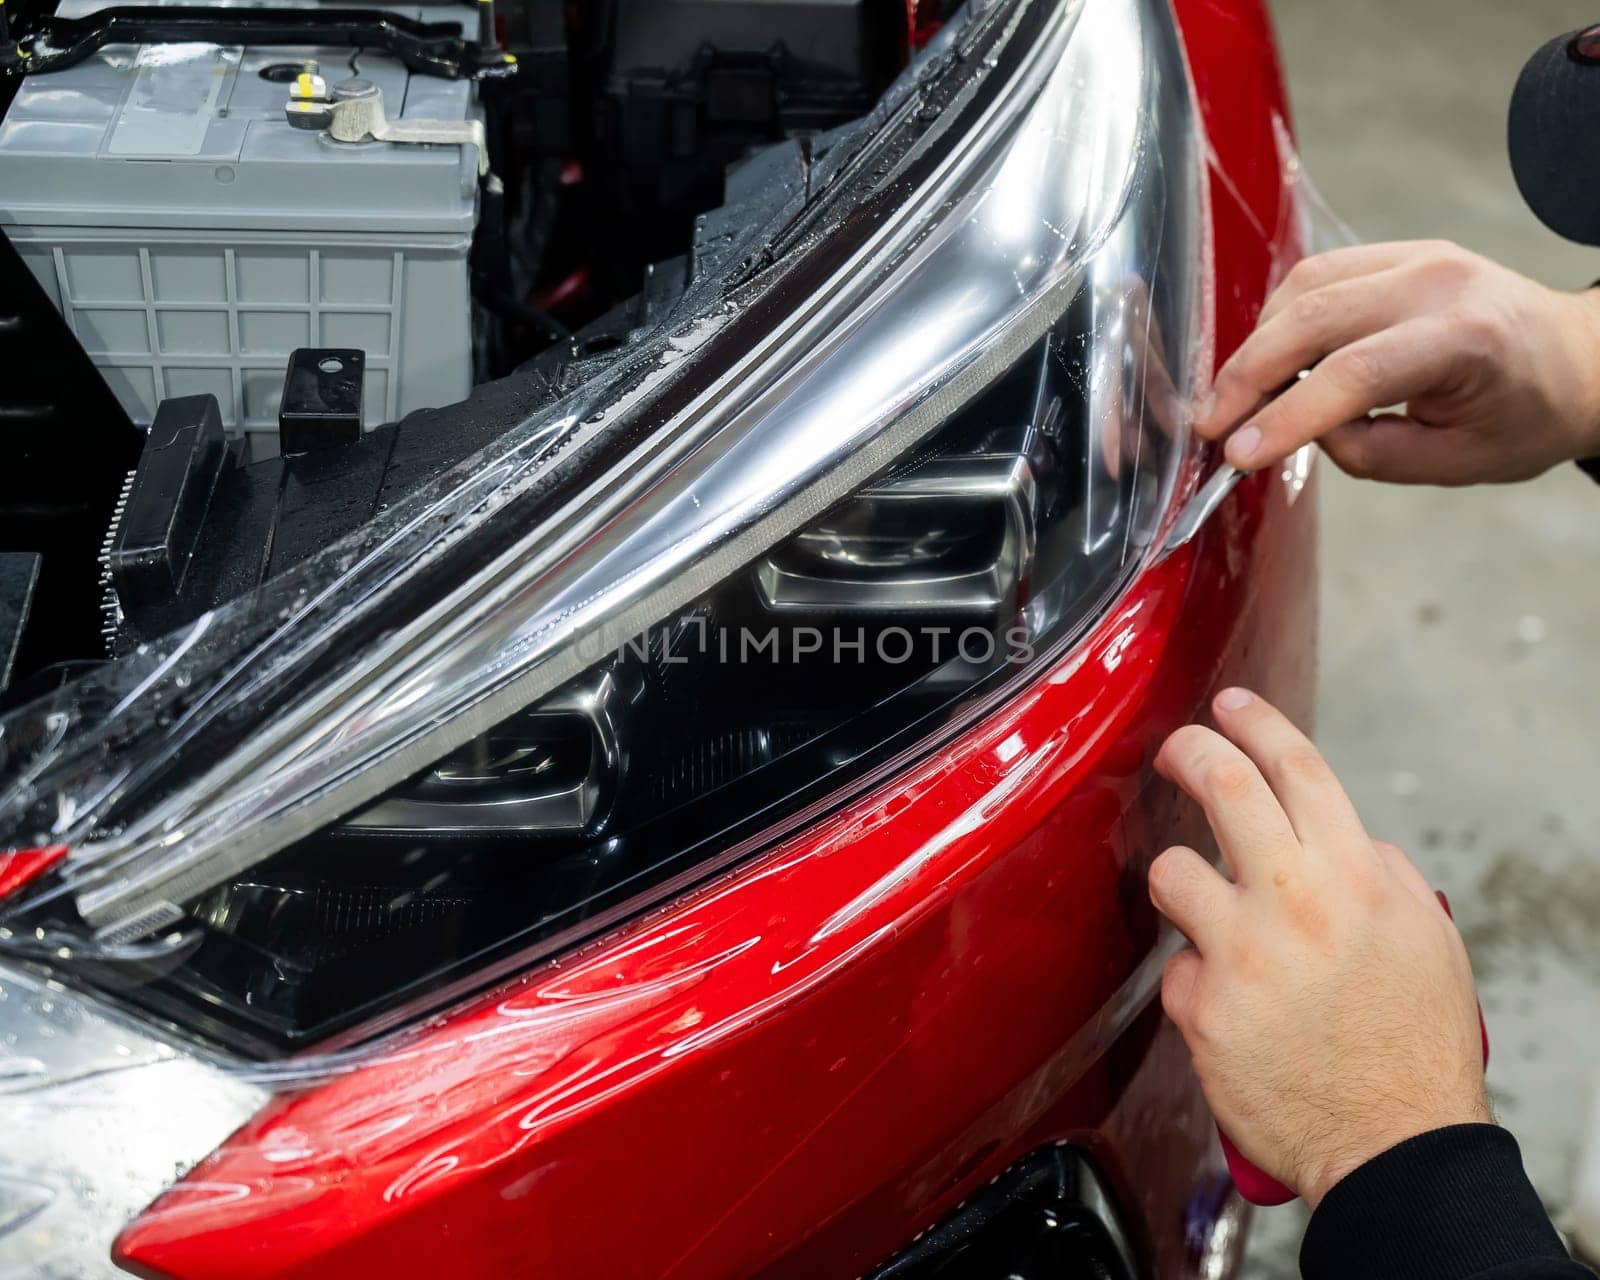 The process of applying protective vinyl film to car headlights in detailing